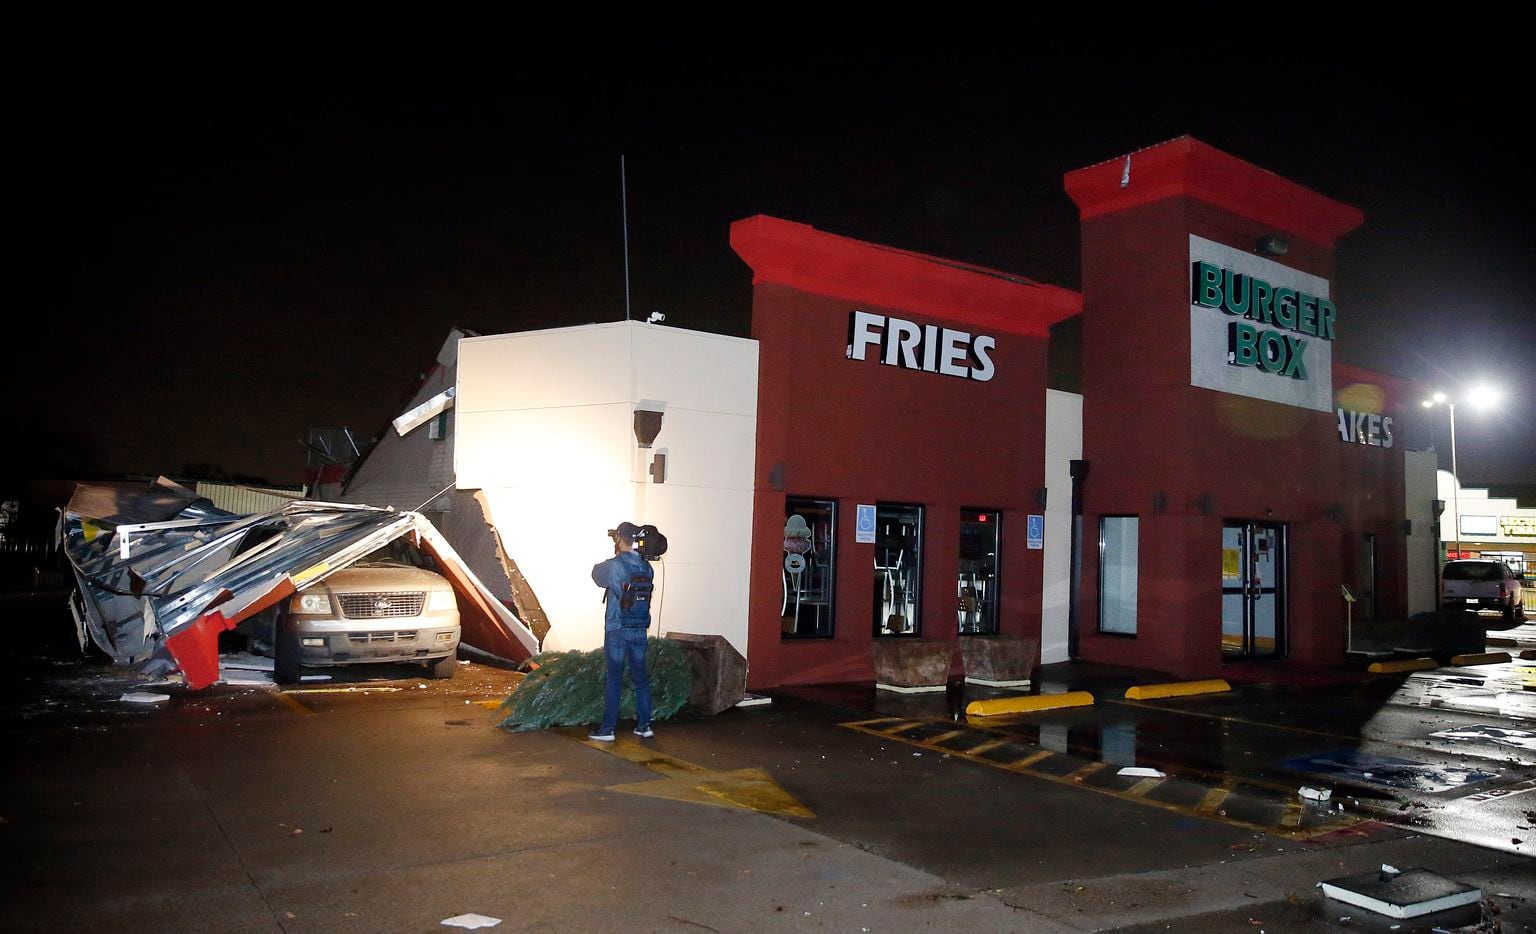 The roof of the drive-thru at the Burger Box restaurant on Cooper St. in Arlington trapped drivers when a tornado-warned storm blew through, Tuesday night, November 24, 2020. No one was seriously injured.